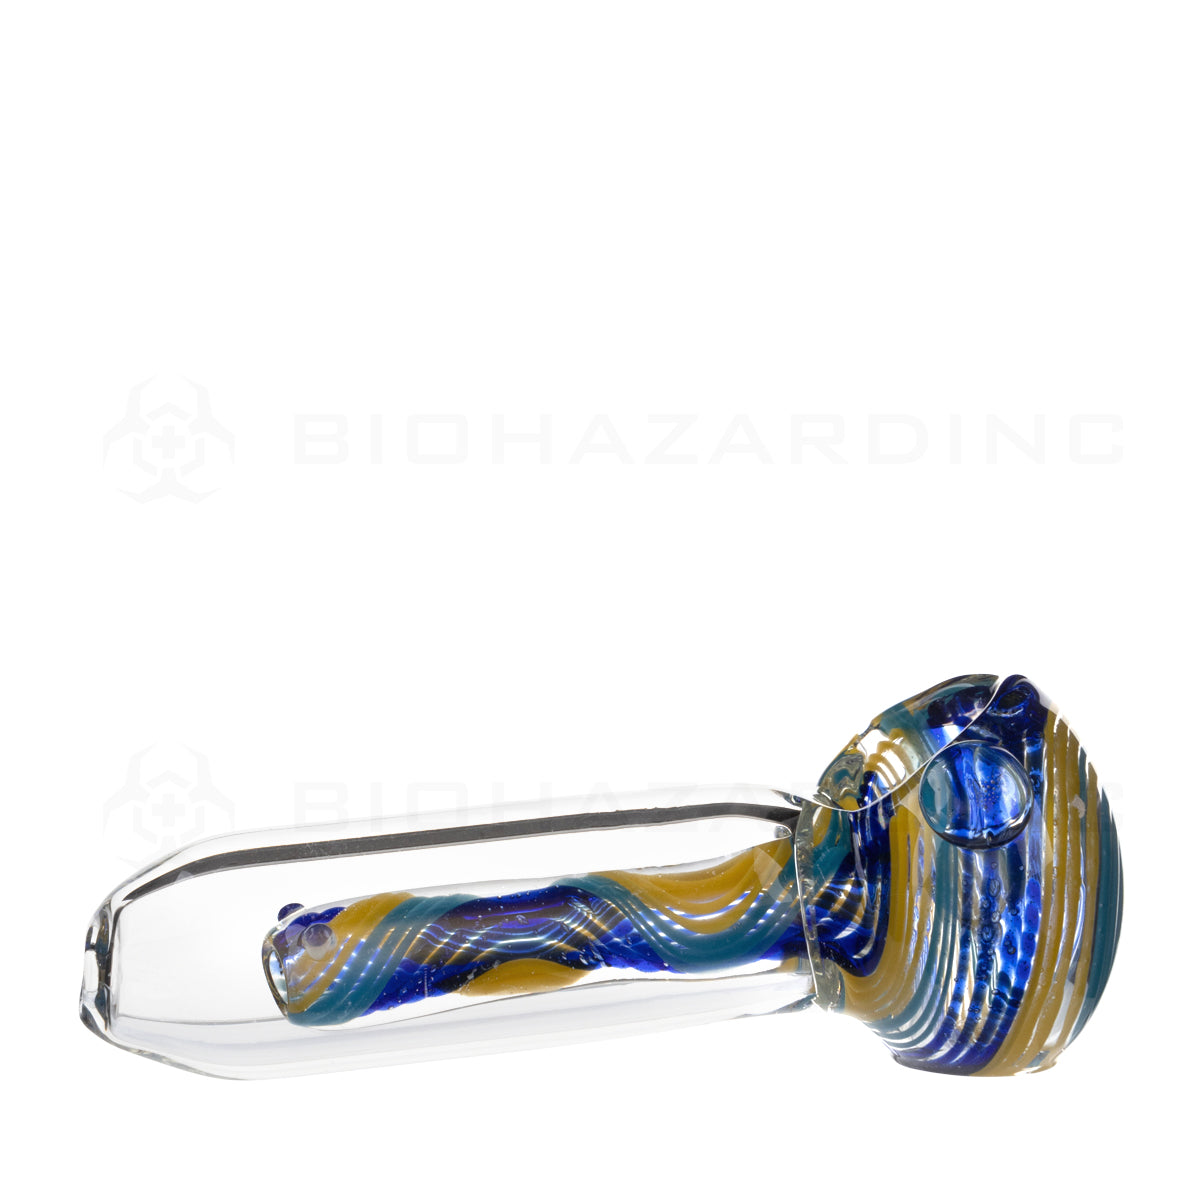 Hand Pipe | Steam Roller Hand Pipe | 5" - Glass - Assorted Colors Glass Hand Pipe Biohazard Inc   